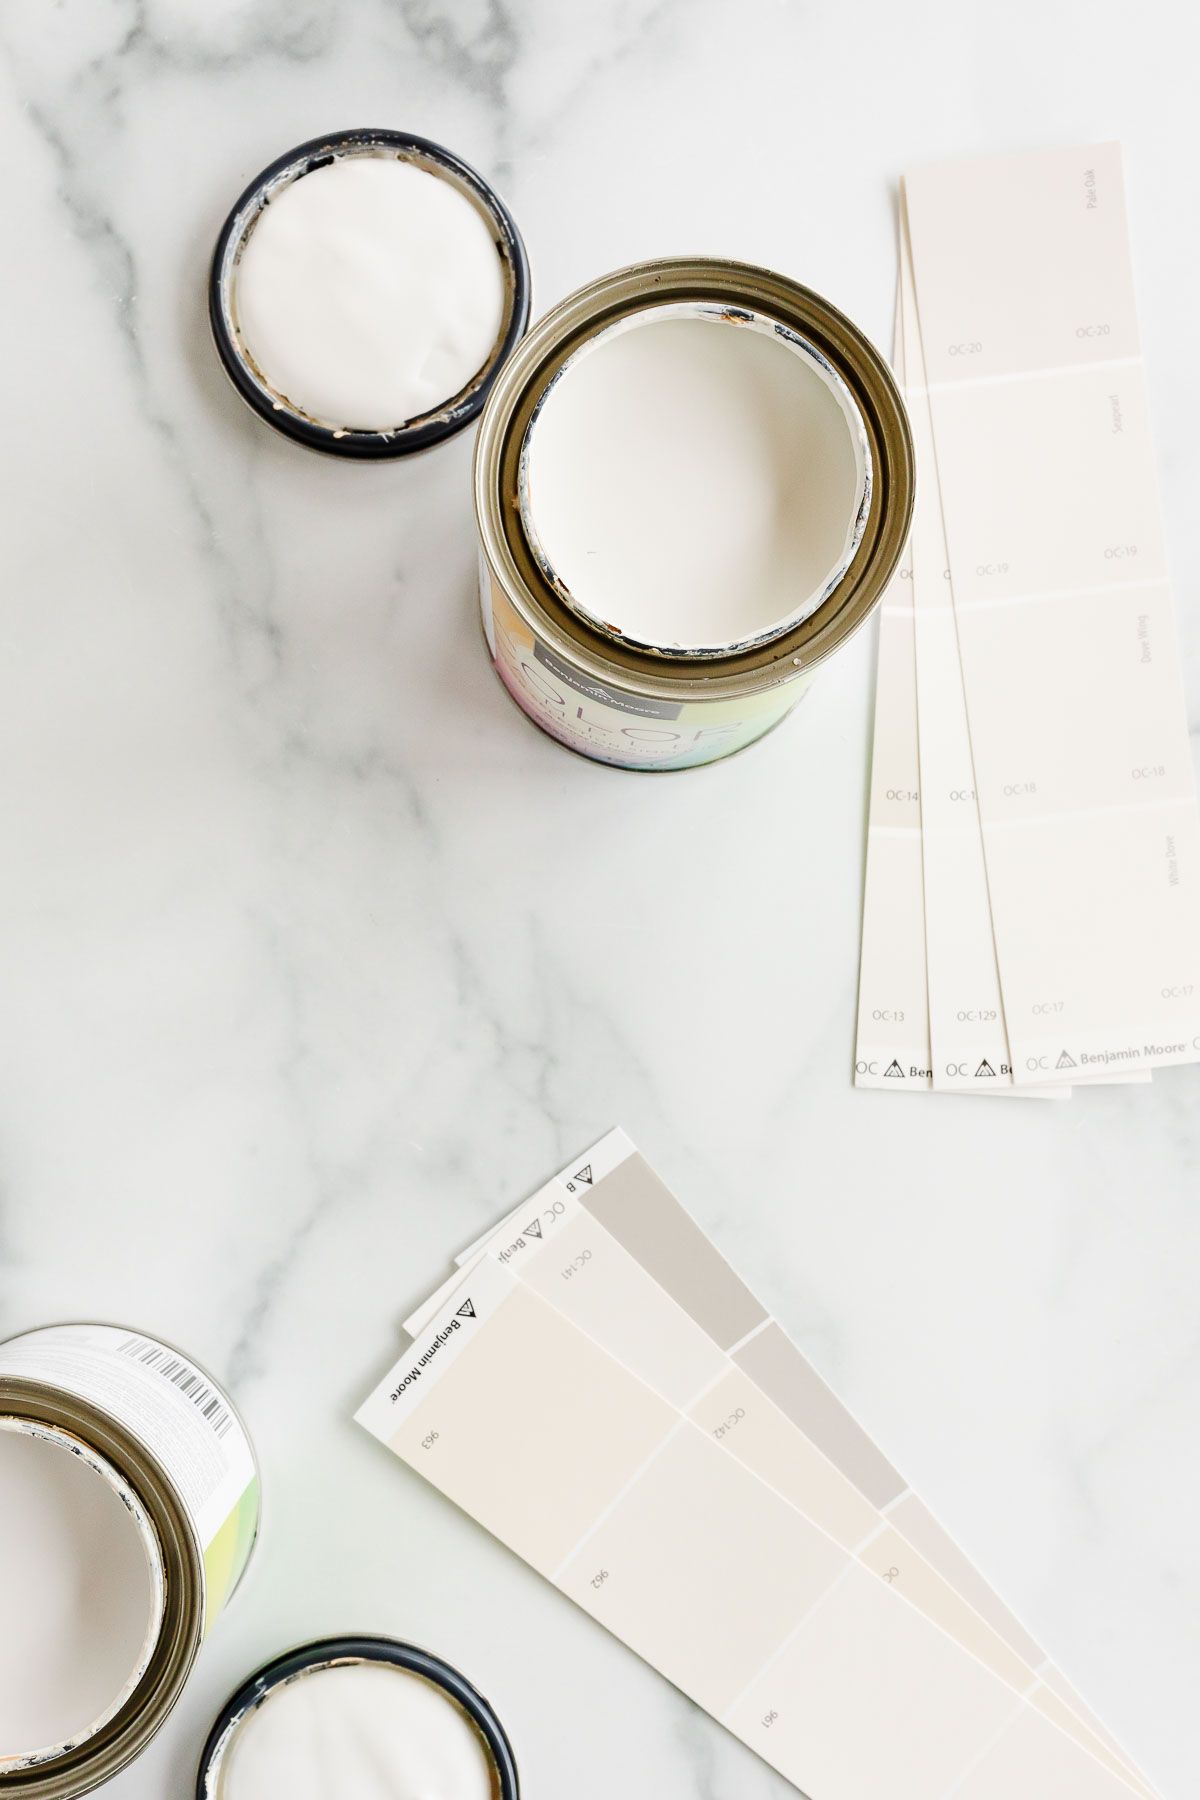 Open cans of warm whites and paint swatch cards laid out on a marble surface.